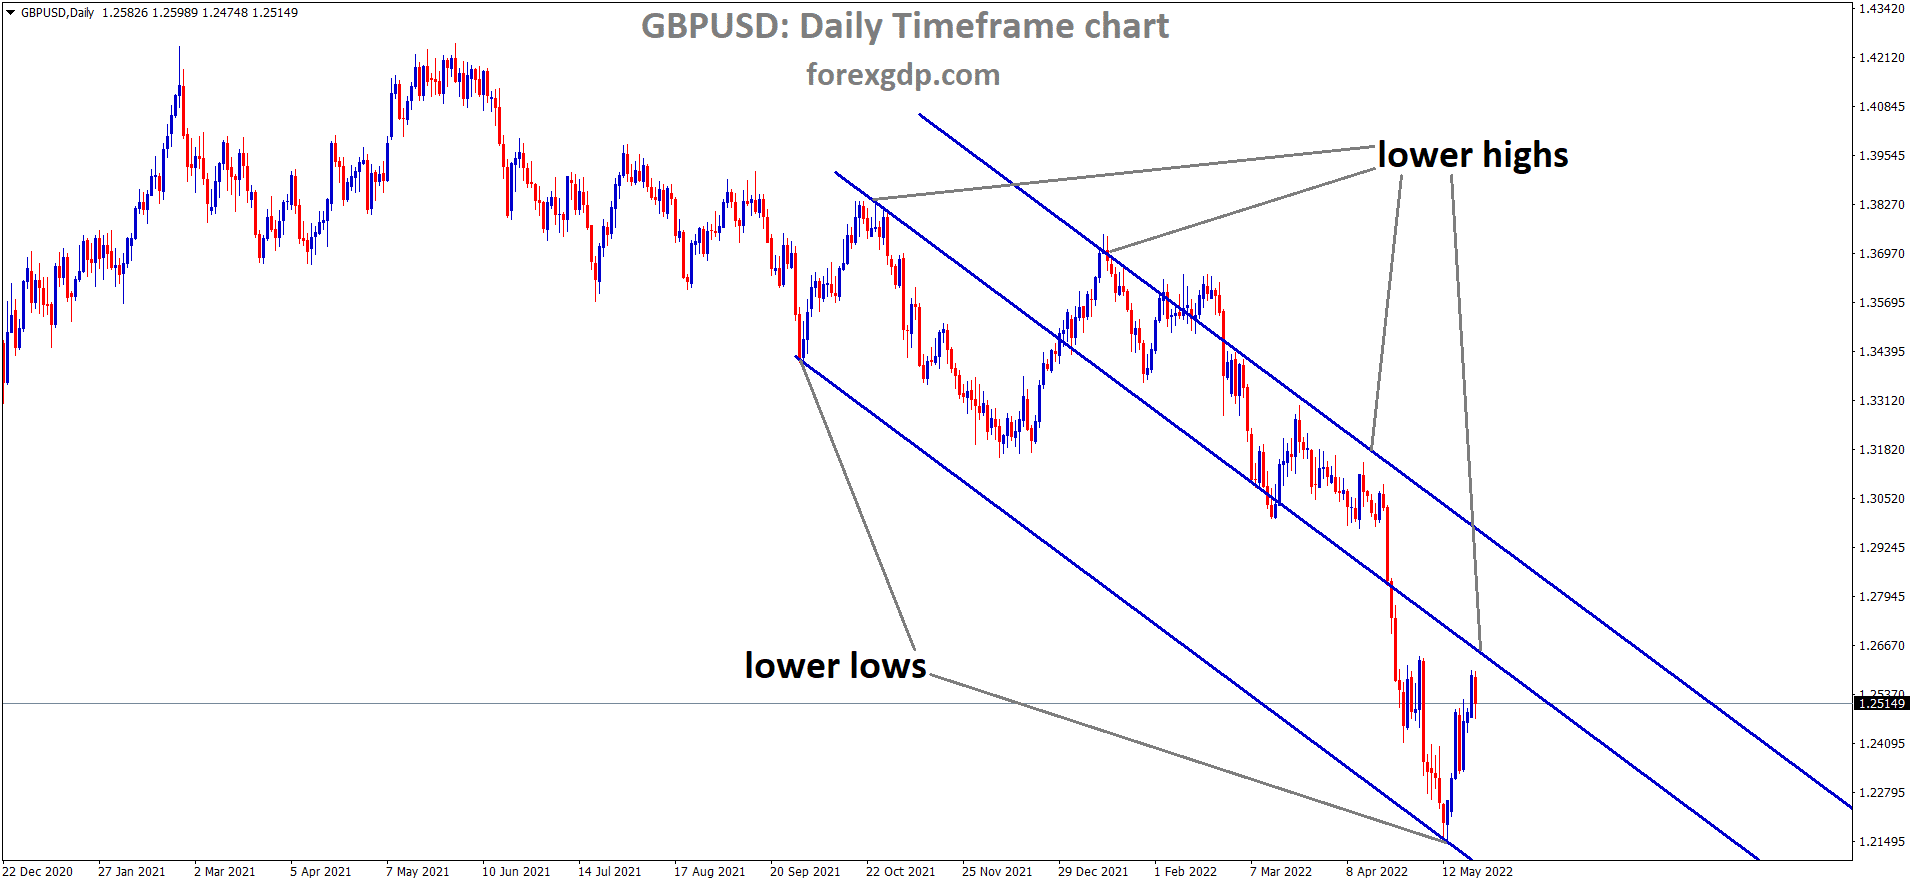 GBPUSD Daily Time Frame Analysis Market is moving in the Descending channel and the Market has rebounded from the Lower low area of the channel 1